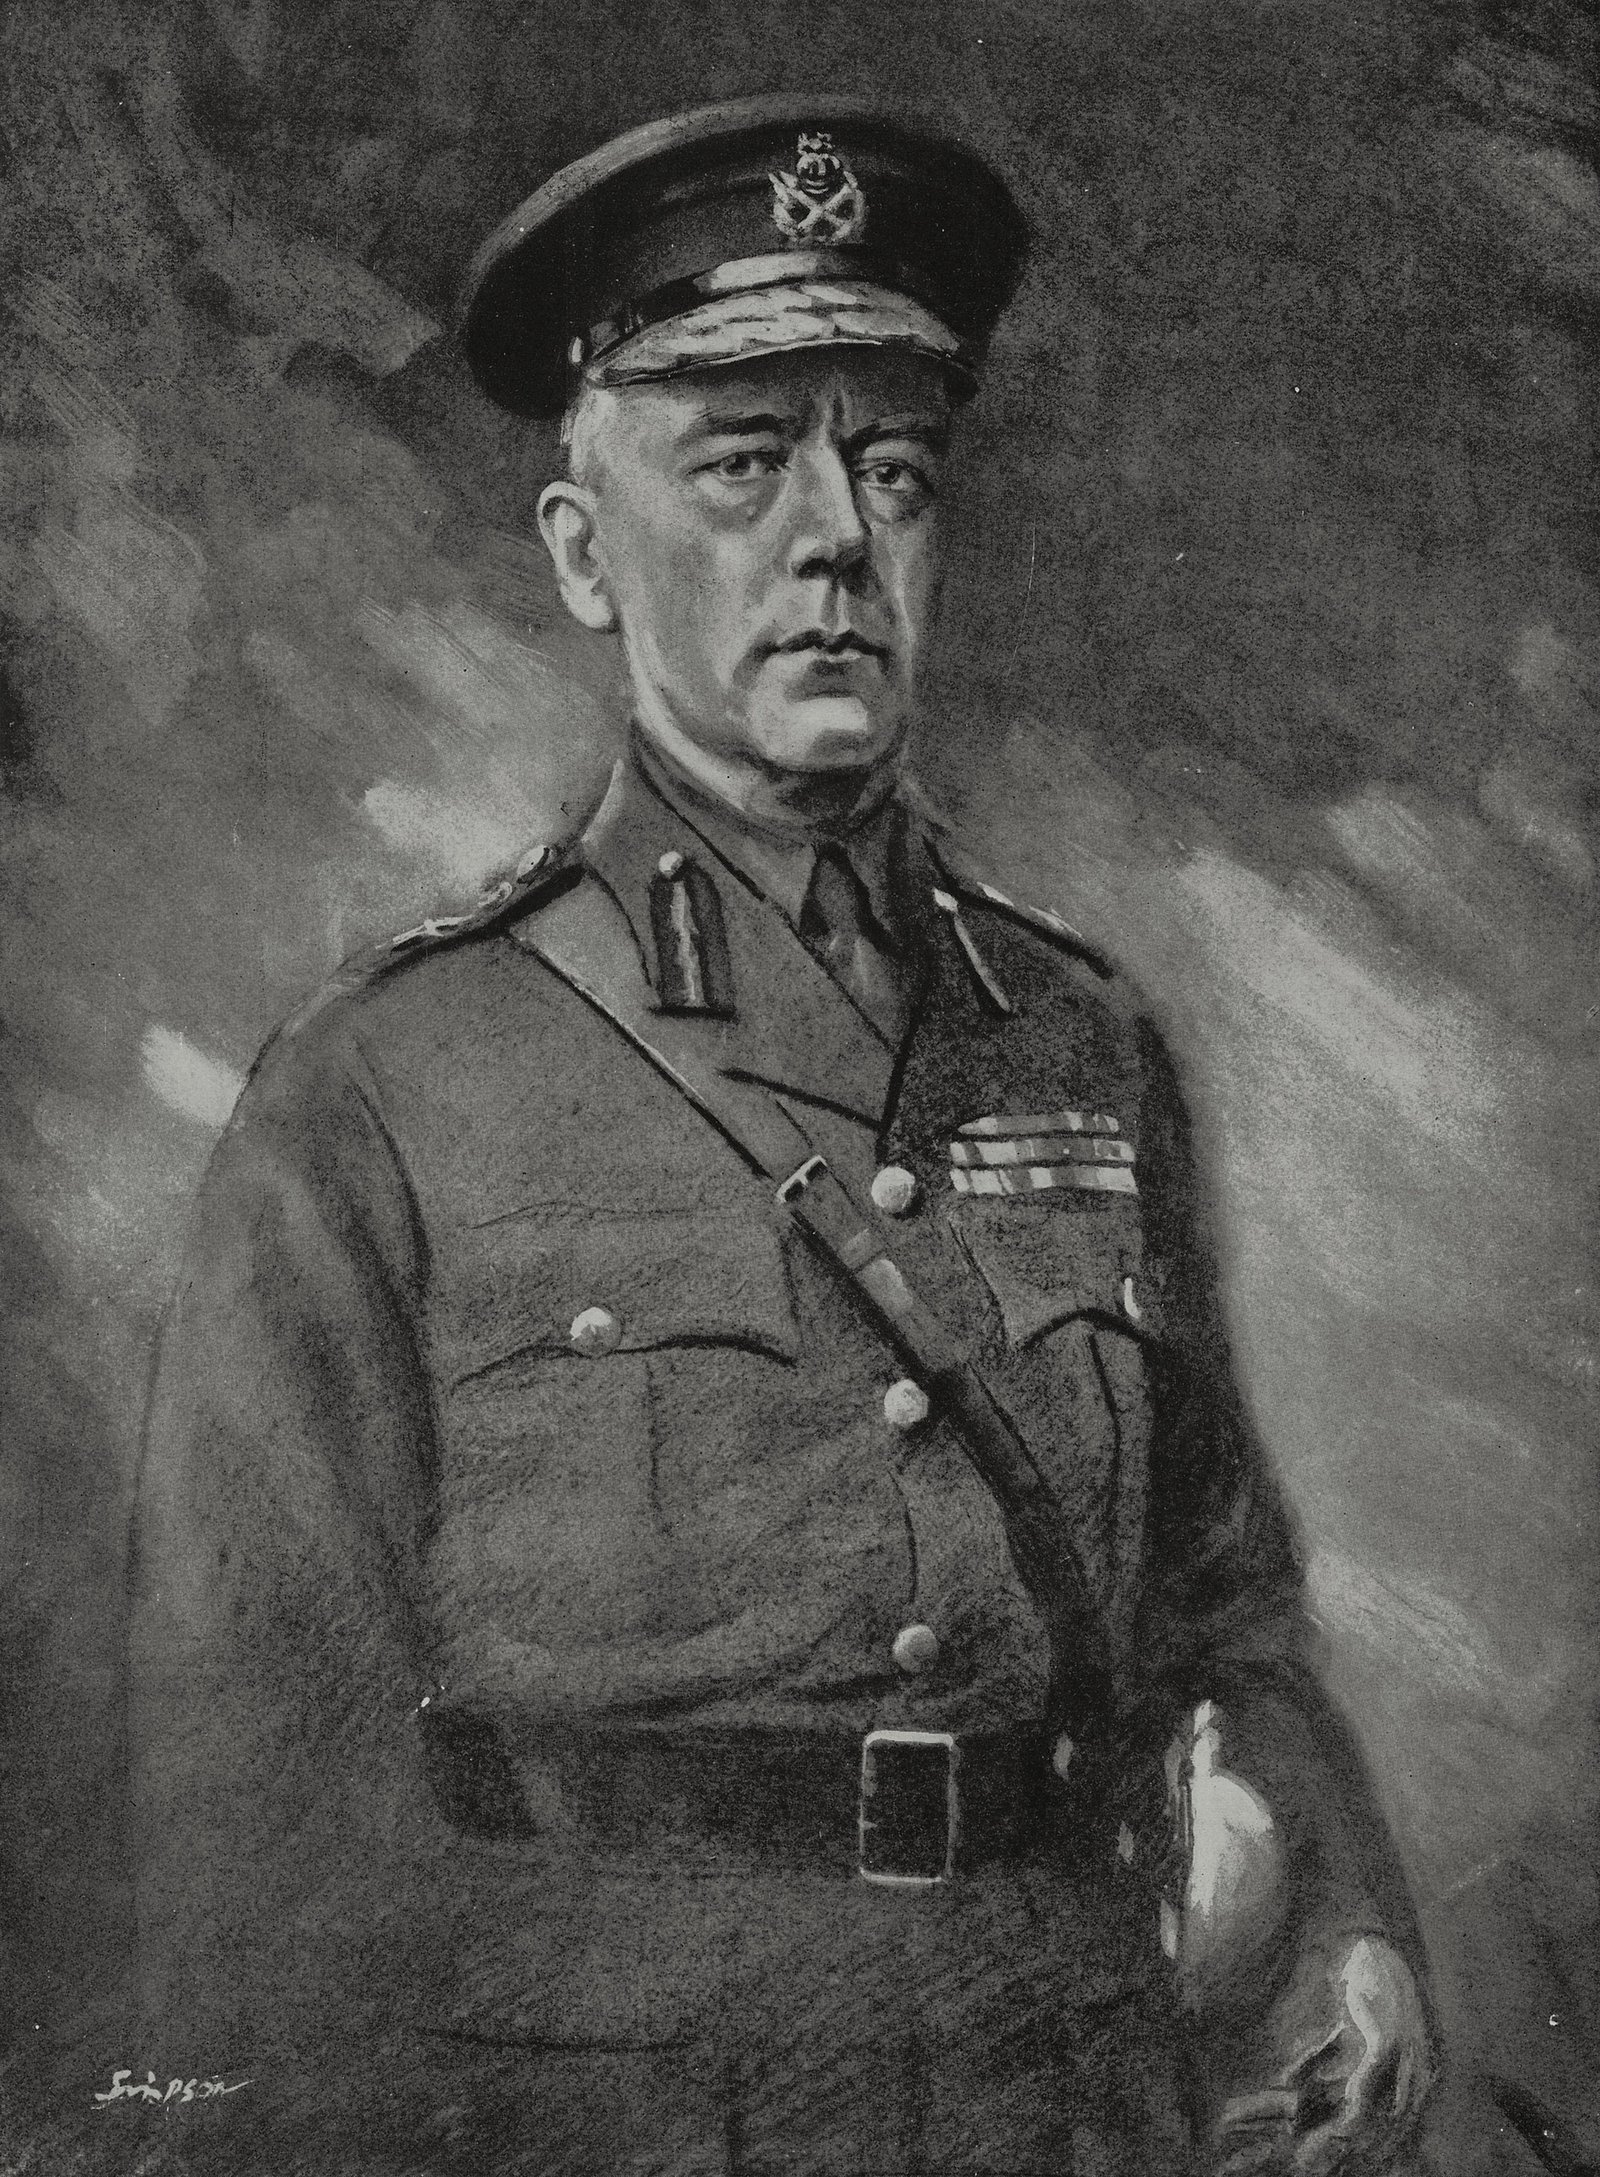 Image - General Nevil Macready in a drawing by Joseph Simpson from The Illustrated London News July 31, 1920